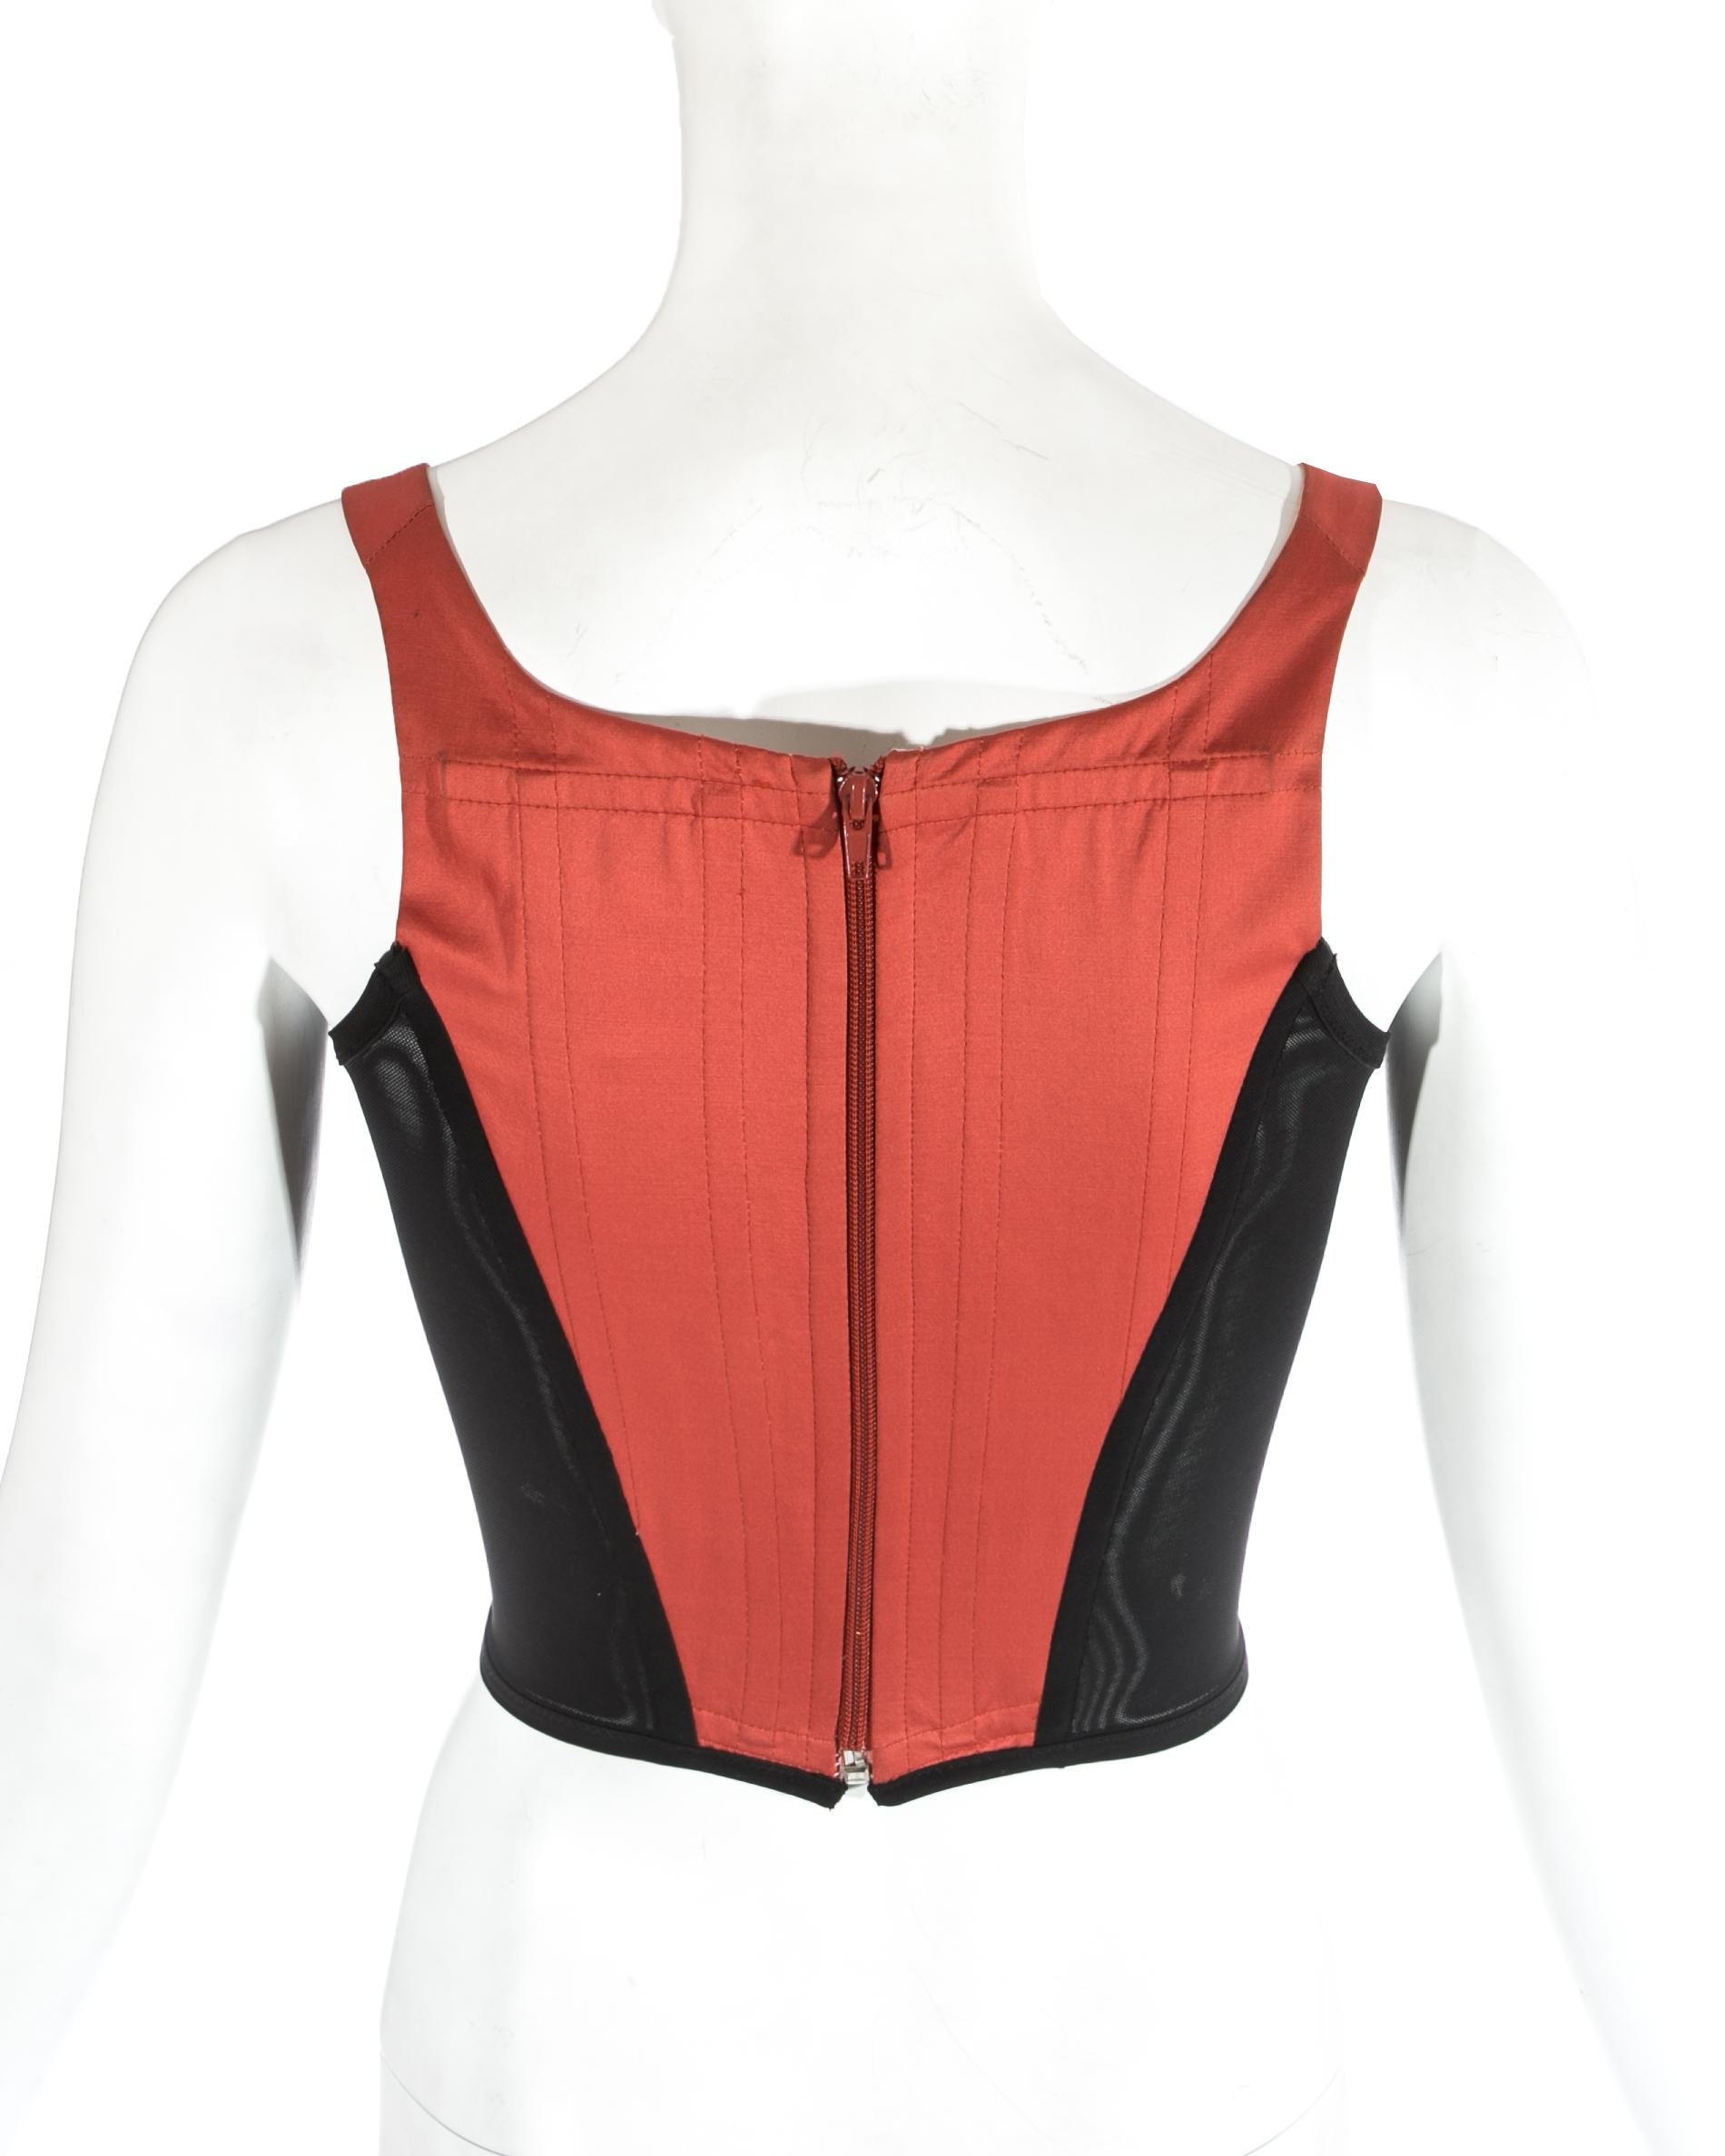 Vivienne Westwood red and black boned corset, fw 1999 1